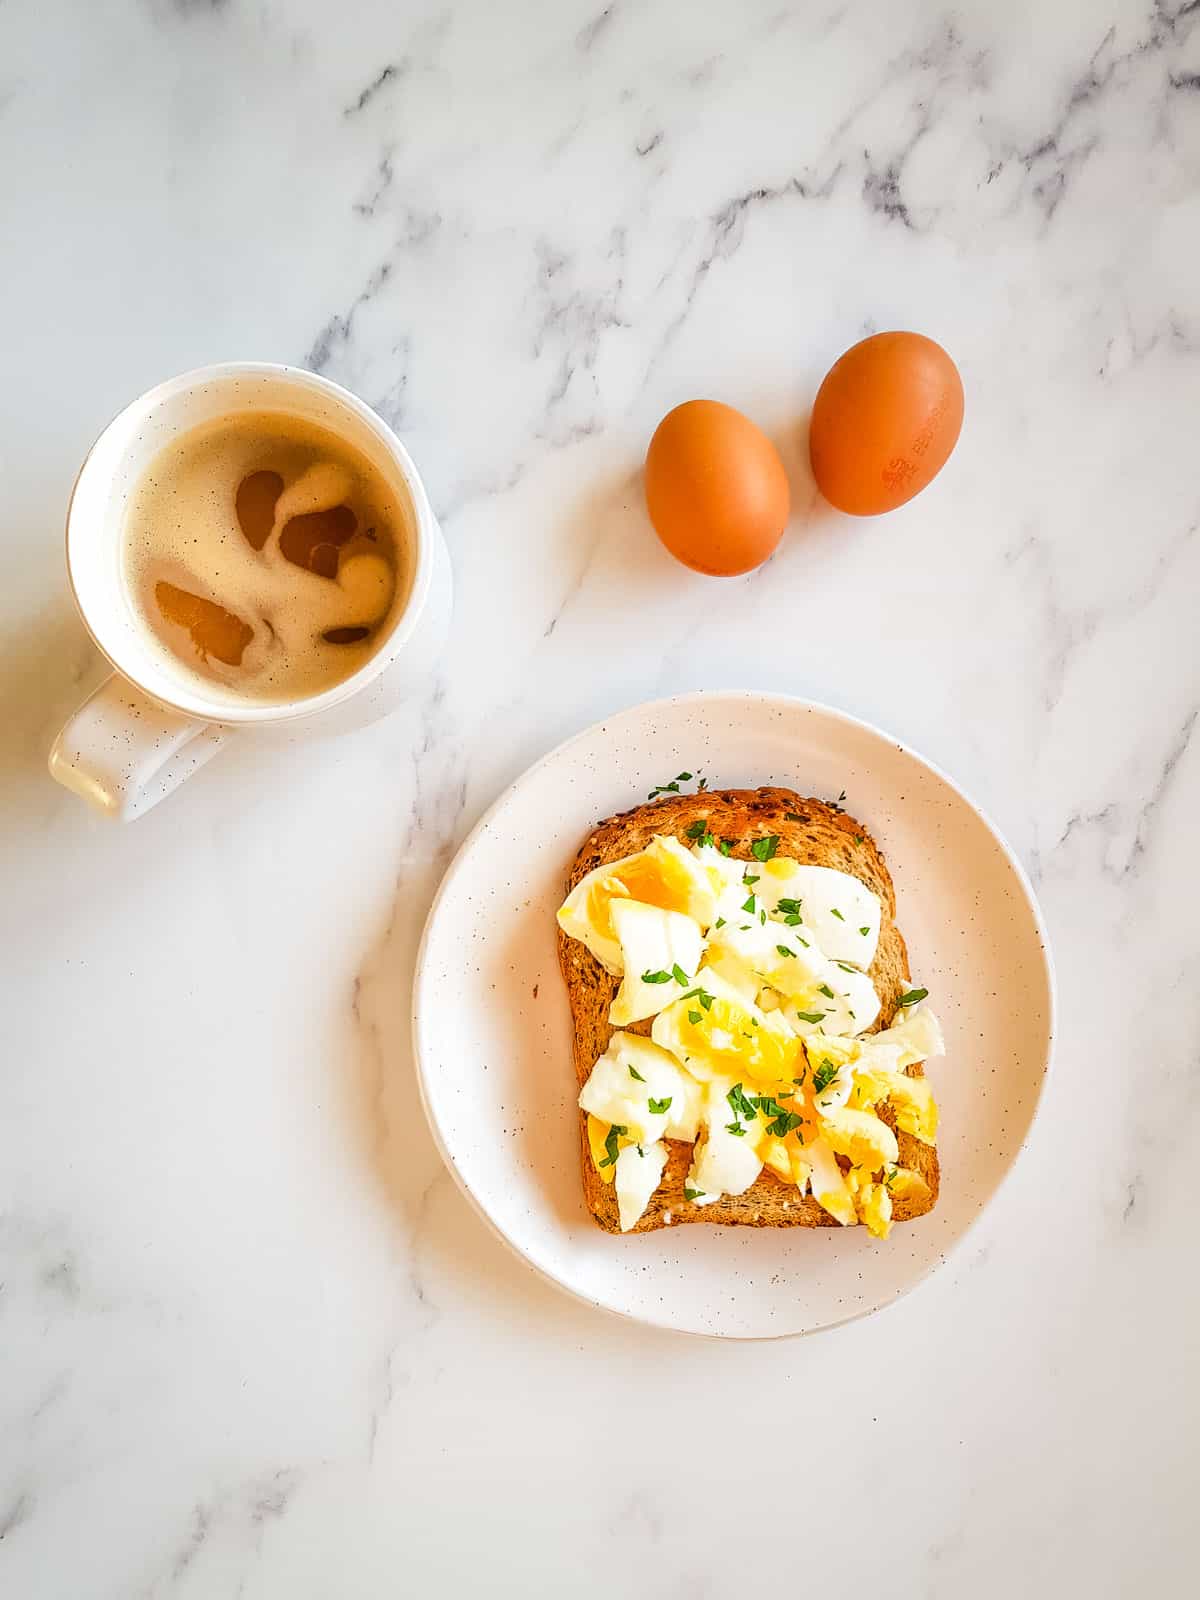 Smashed egg on toast with a cup of coffee.